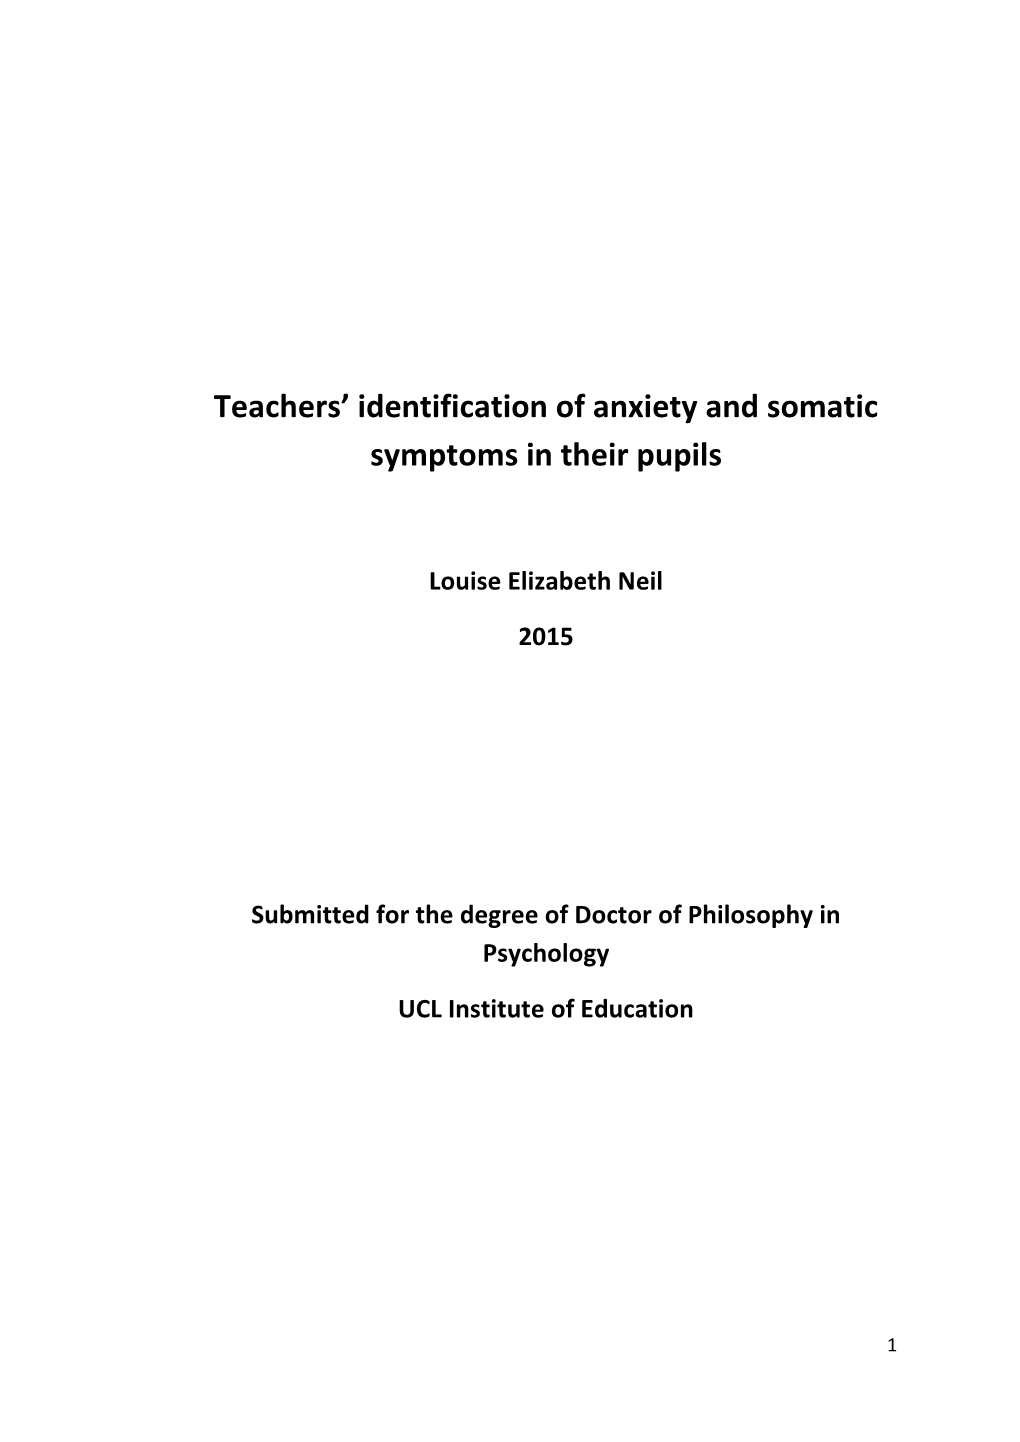 Teachers' Identification of Anxiety and Somatic Symptoms in Their Pupils